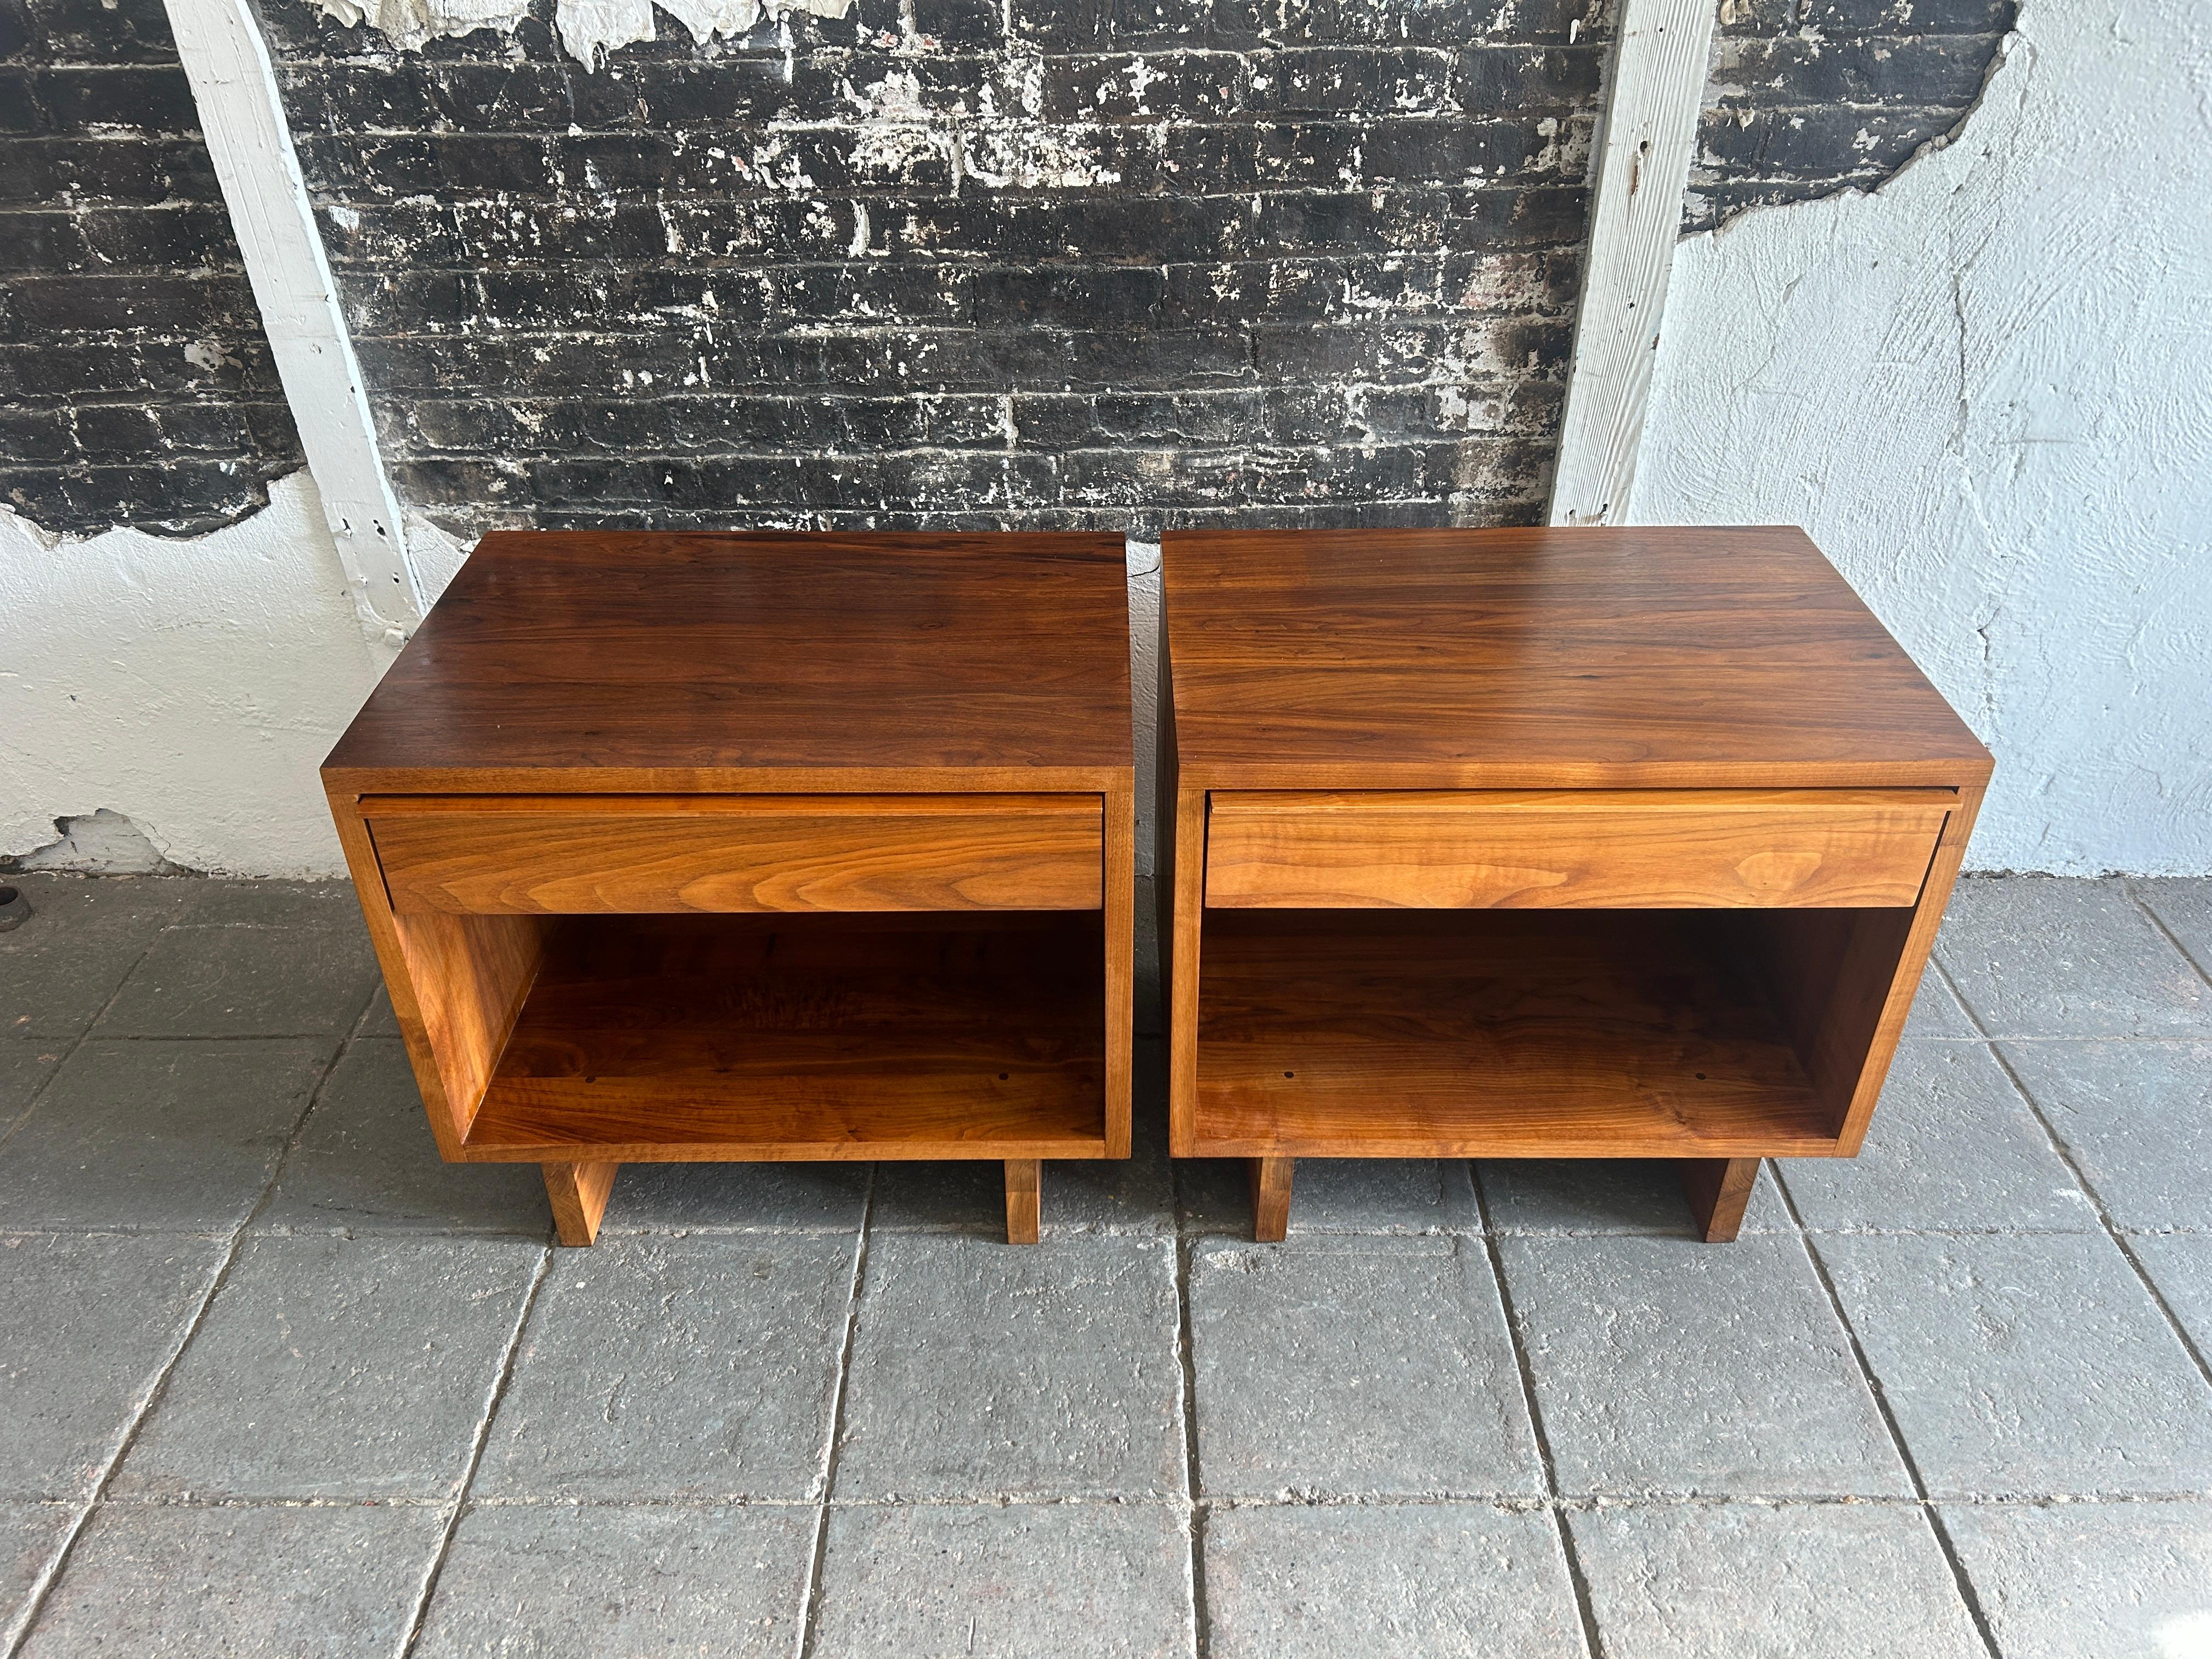 Pair Studio craft Custom made Modern Solid Walnut single drawer nightstands style of Nakashima. Beautiful design and woodwork Made in Vermont with solid walnut wood. All drawer are solid blonde birch wood with metal drawer glides. Very solid